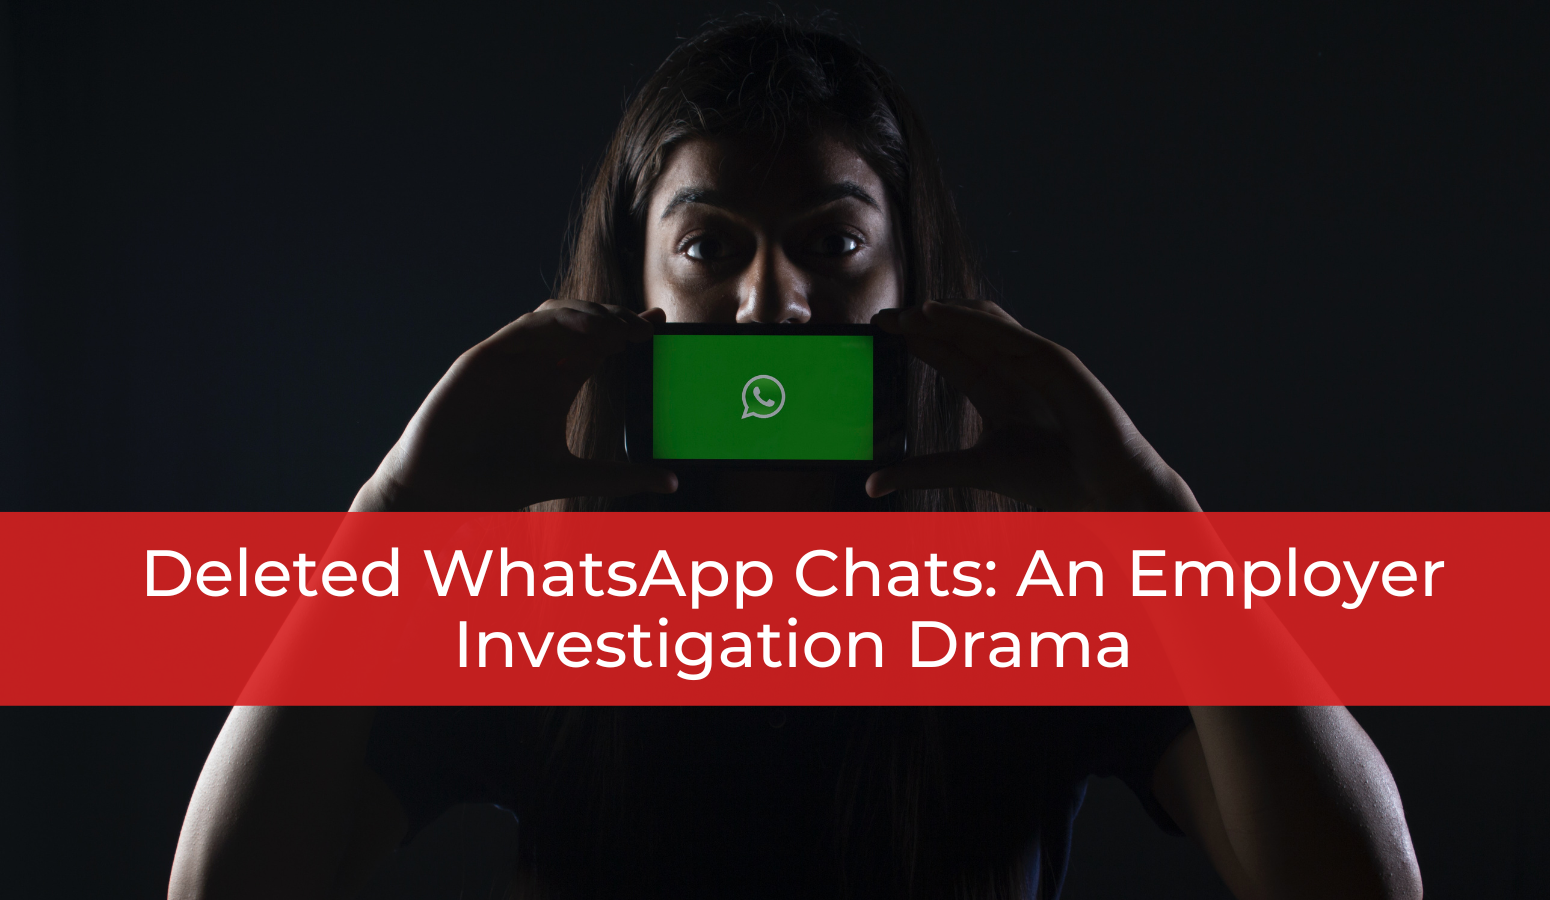 Deleted WhatsApp Chats: An Employer Investigation Drama